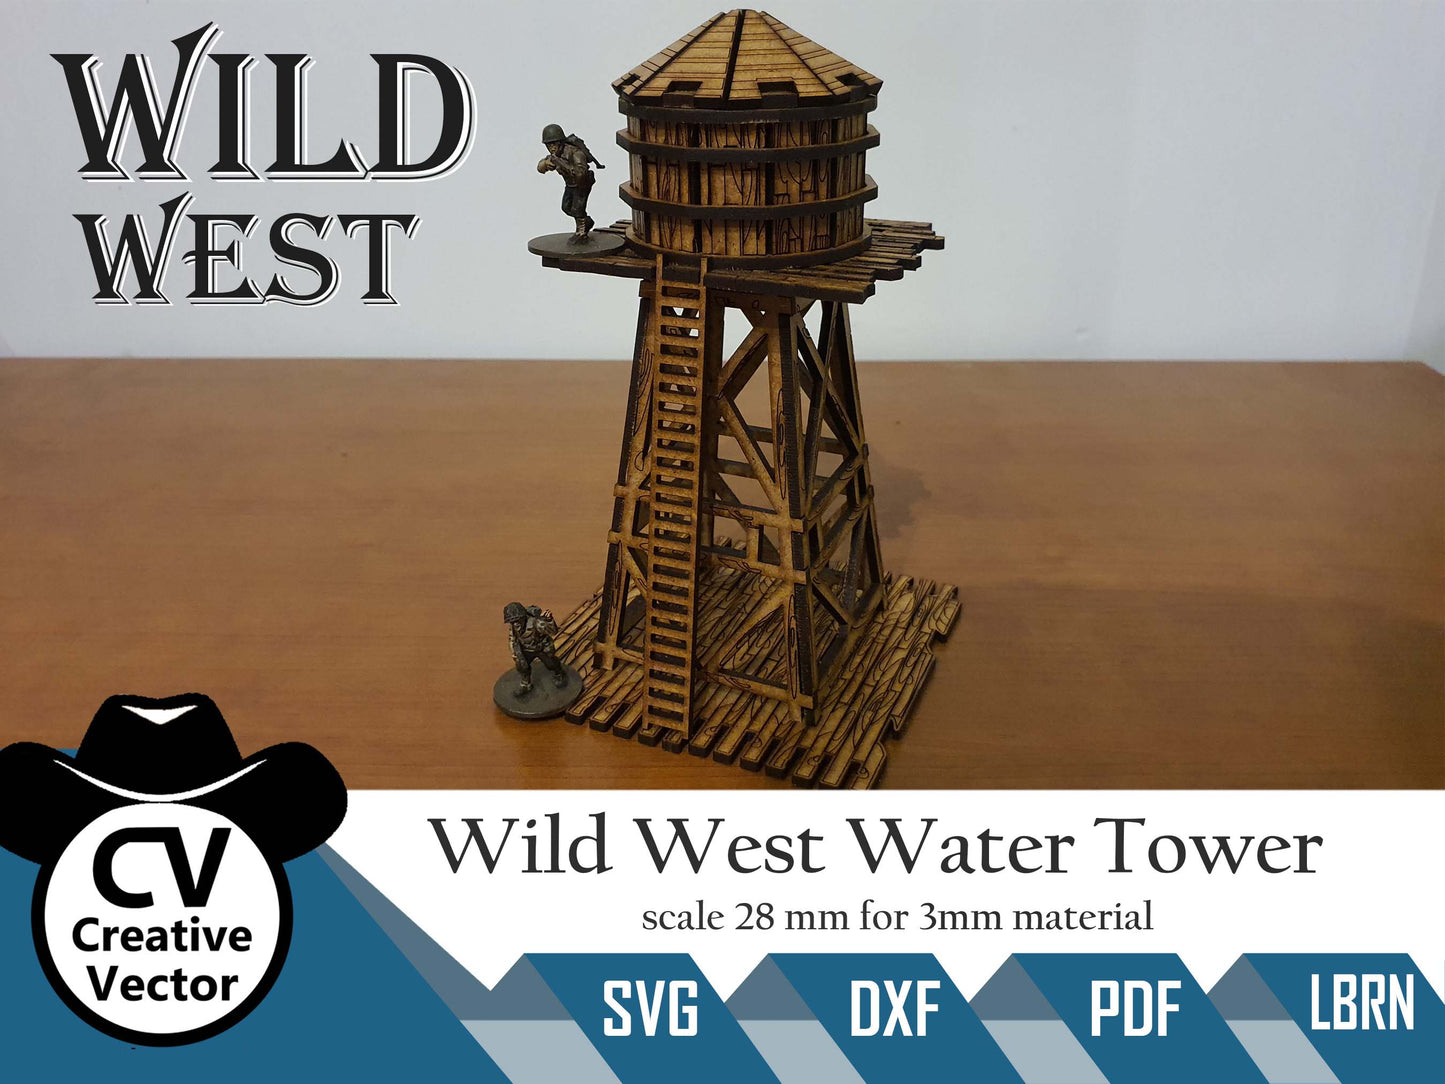 Wild West Water Tower in scale 28mm for Wargamers